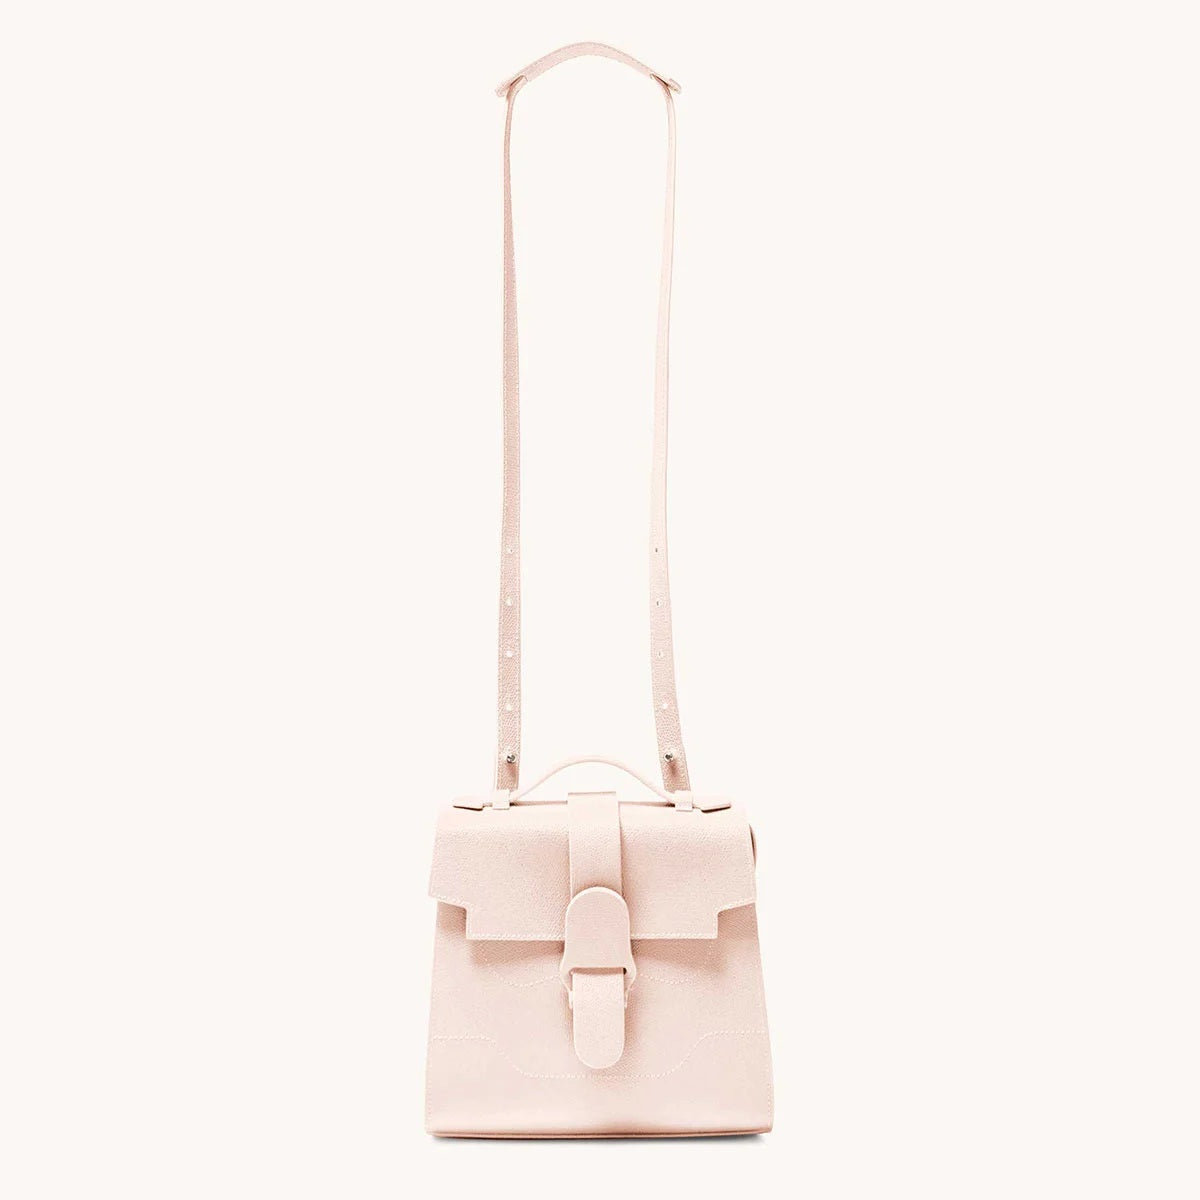 Senreve The Alunna Leather Bag in Sand